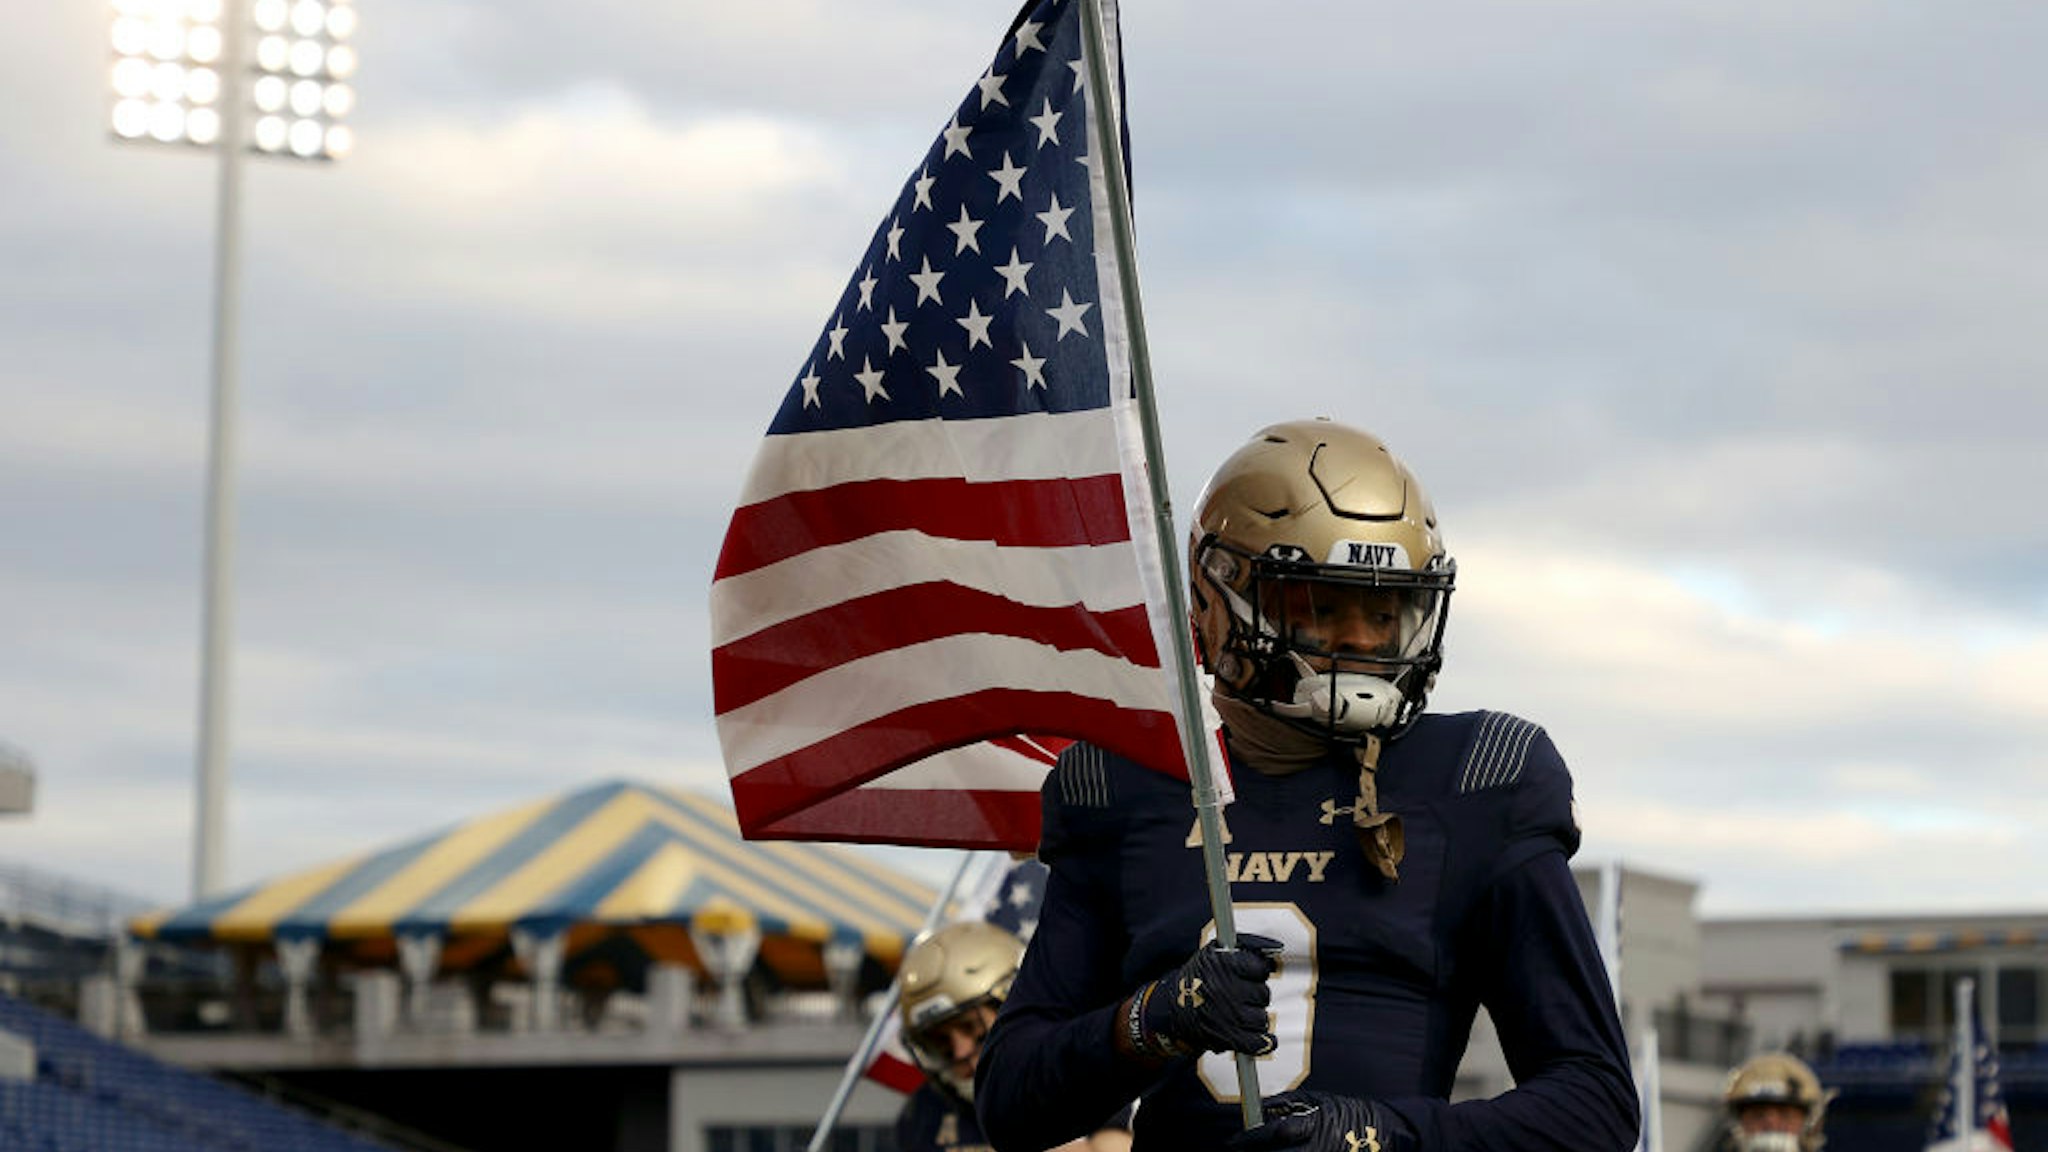 ANNAPOLIS, MARYLAND - DECEMBER 05: Cameron Kinley #3 of the Navy Midshipmen carries an American flag as the team takes the field against the Tulsa Golden Hurricane at Navy-Marine Corps Memorial Stadium on December 05, 2020 in Annapolis, Maryland. (Photo by Rob Carr/Getty Images)